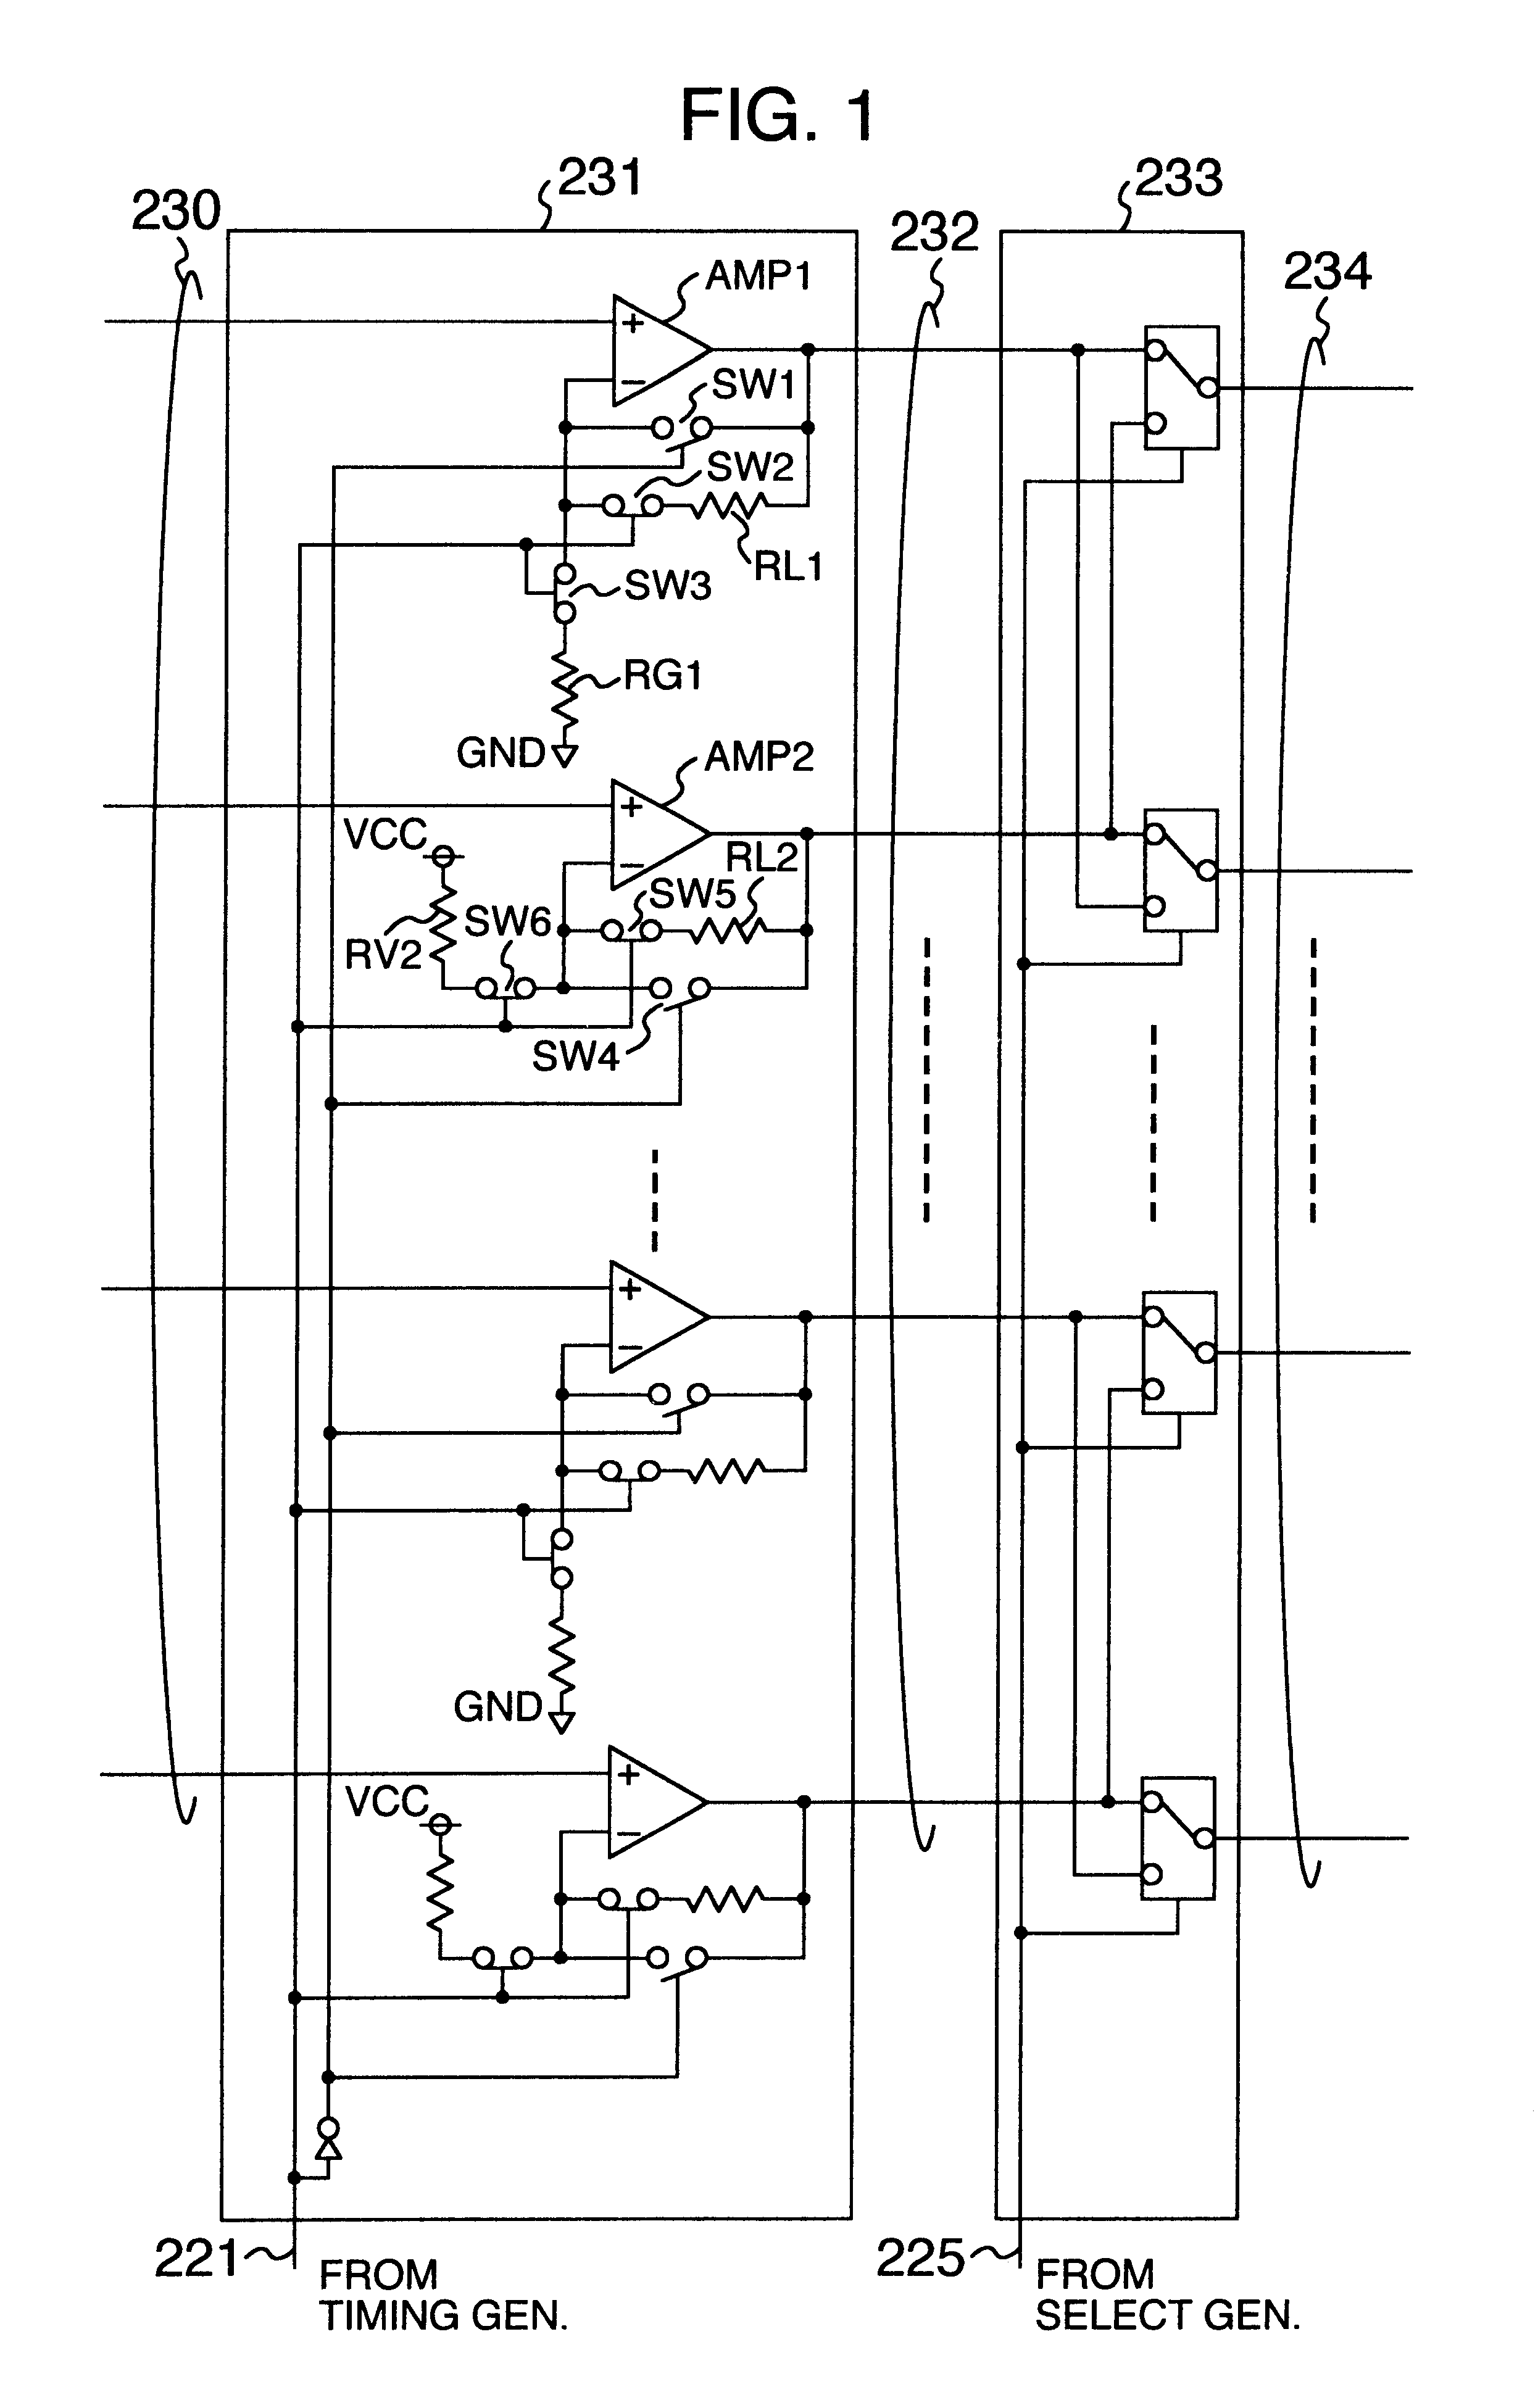 Liquid crystal driver circuit and LCD having fast data write capability